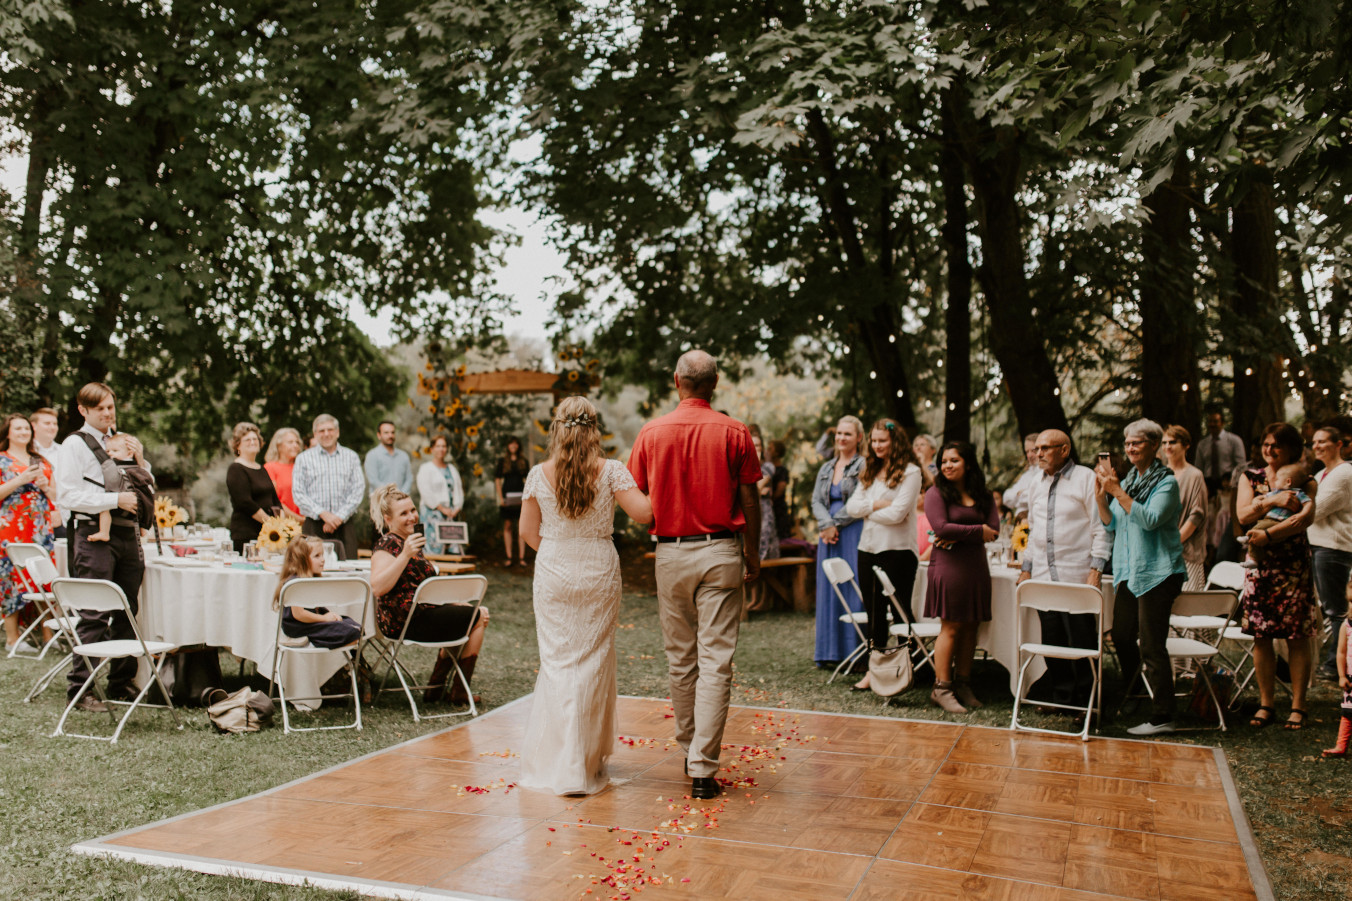 Hannah's father walks her down the aisle in Corvallis, Oregon. Intimate wedding photography in Corvallis Oregon by Sienna Plus Josh.